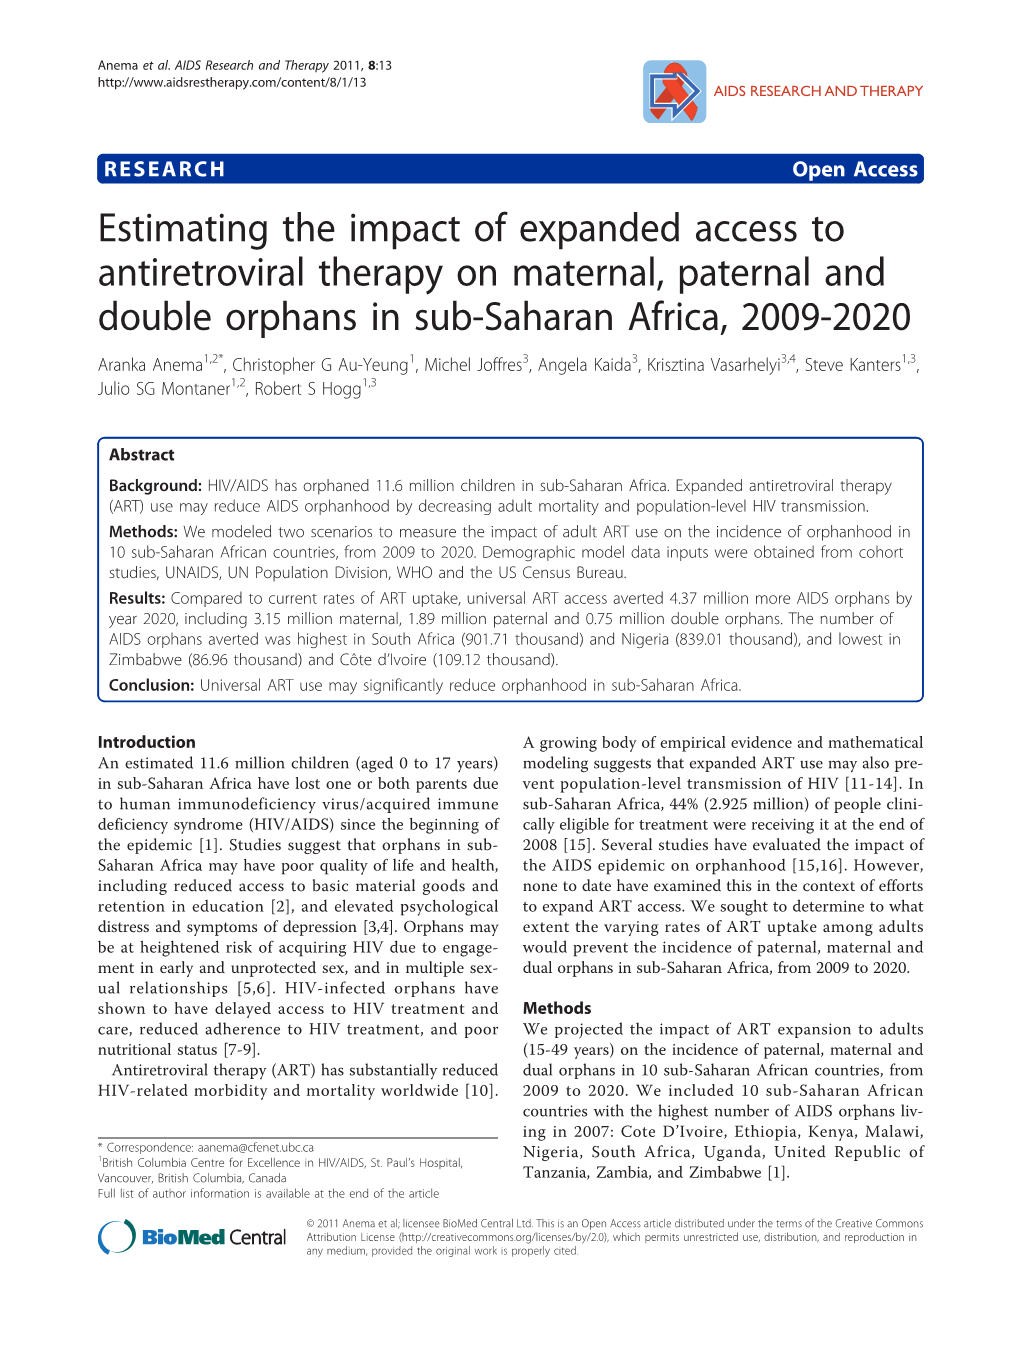 Estimating the Impact of Expanded Access to Antiretroviral Therapy On